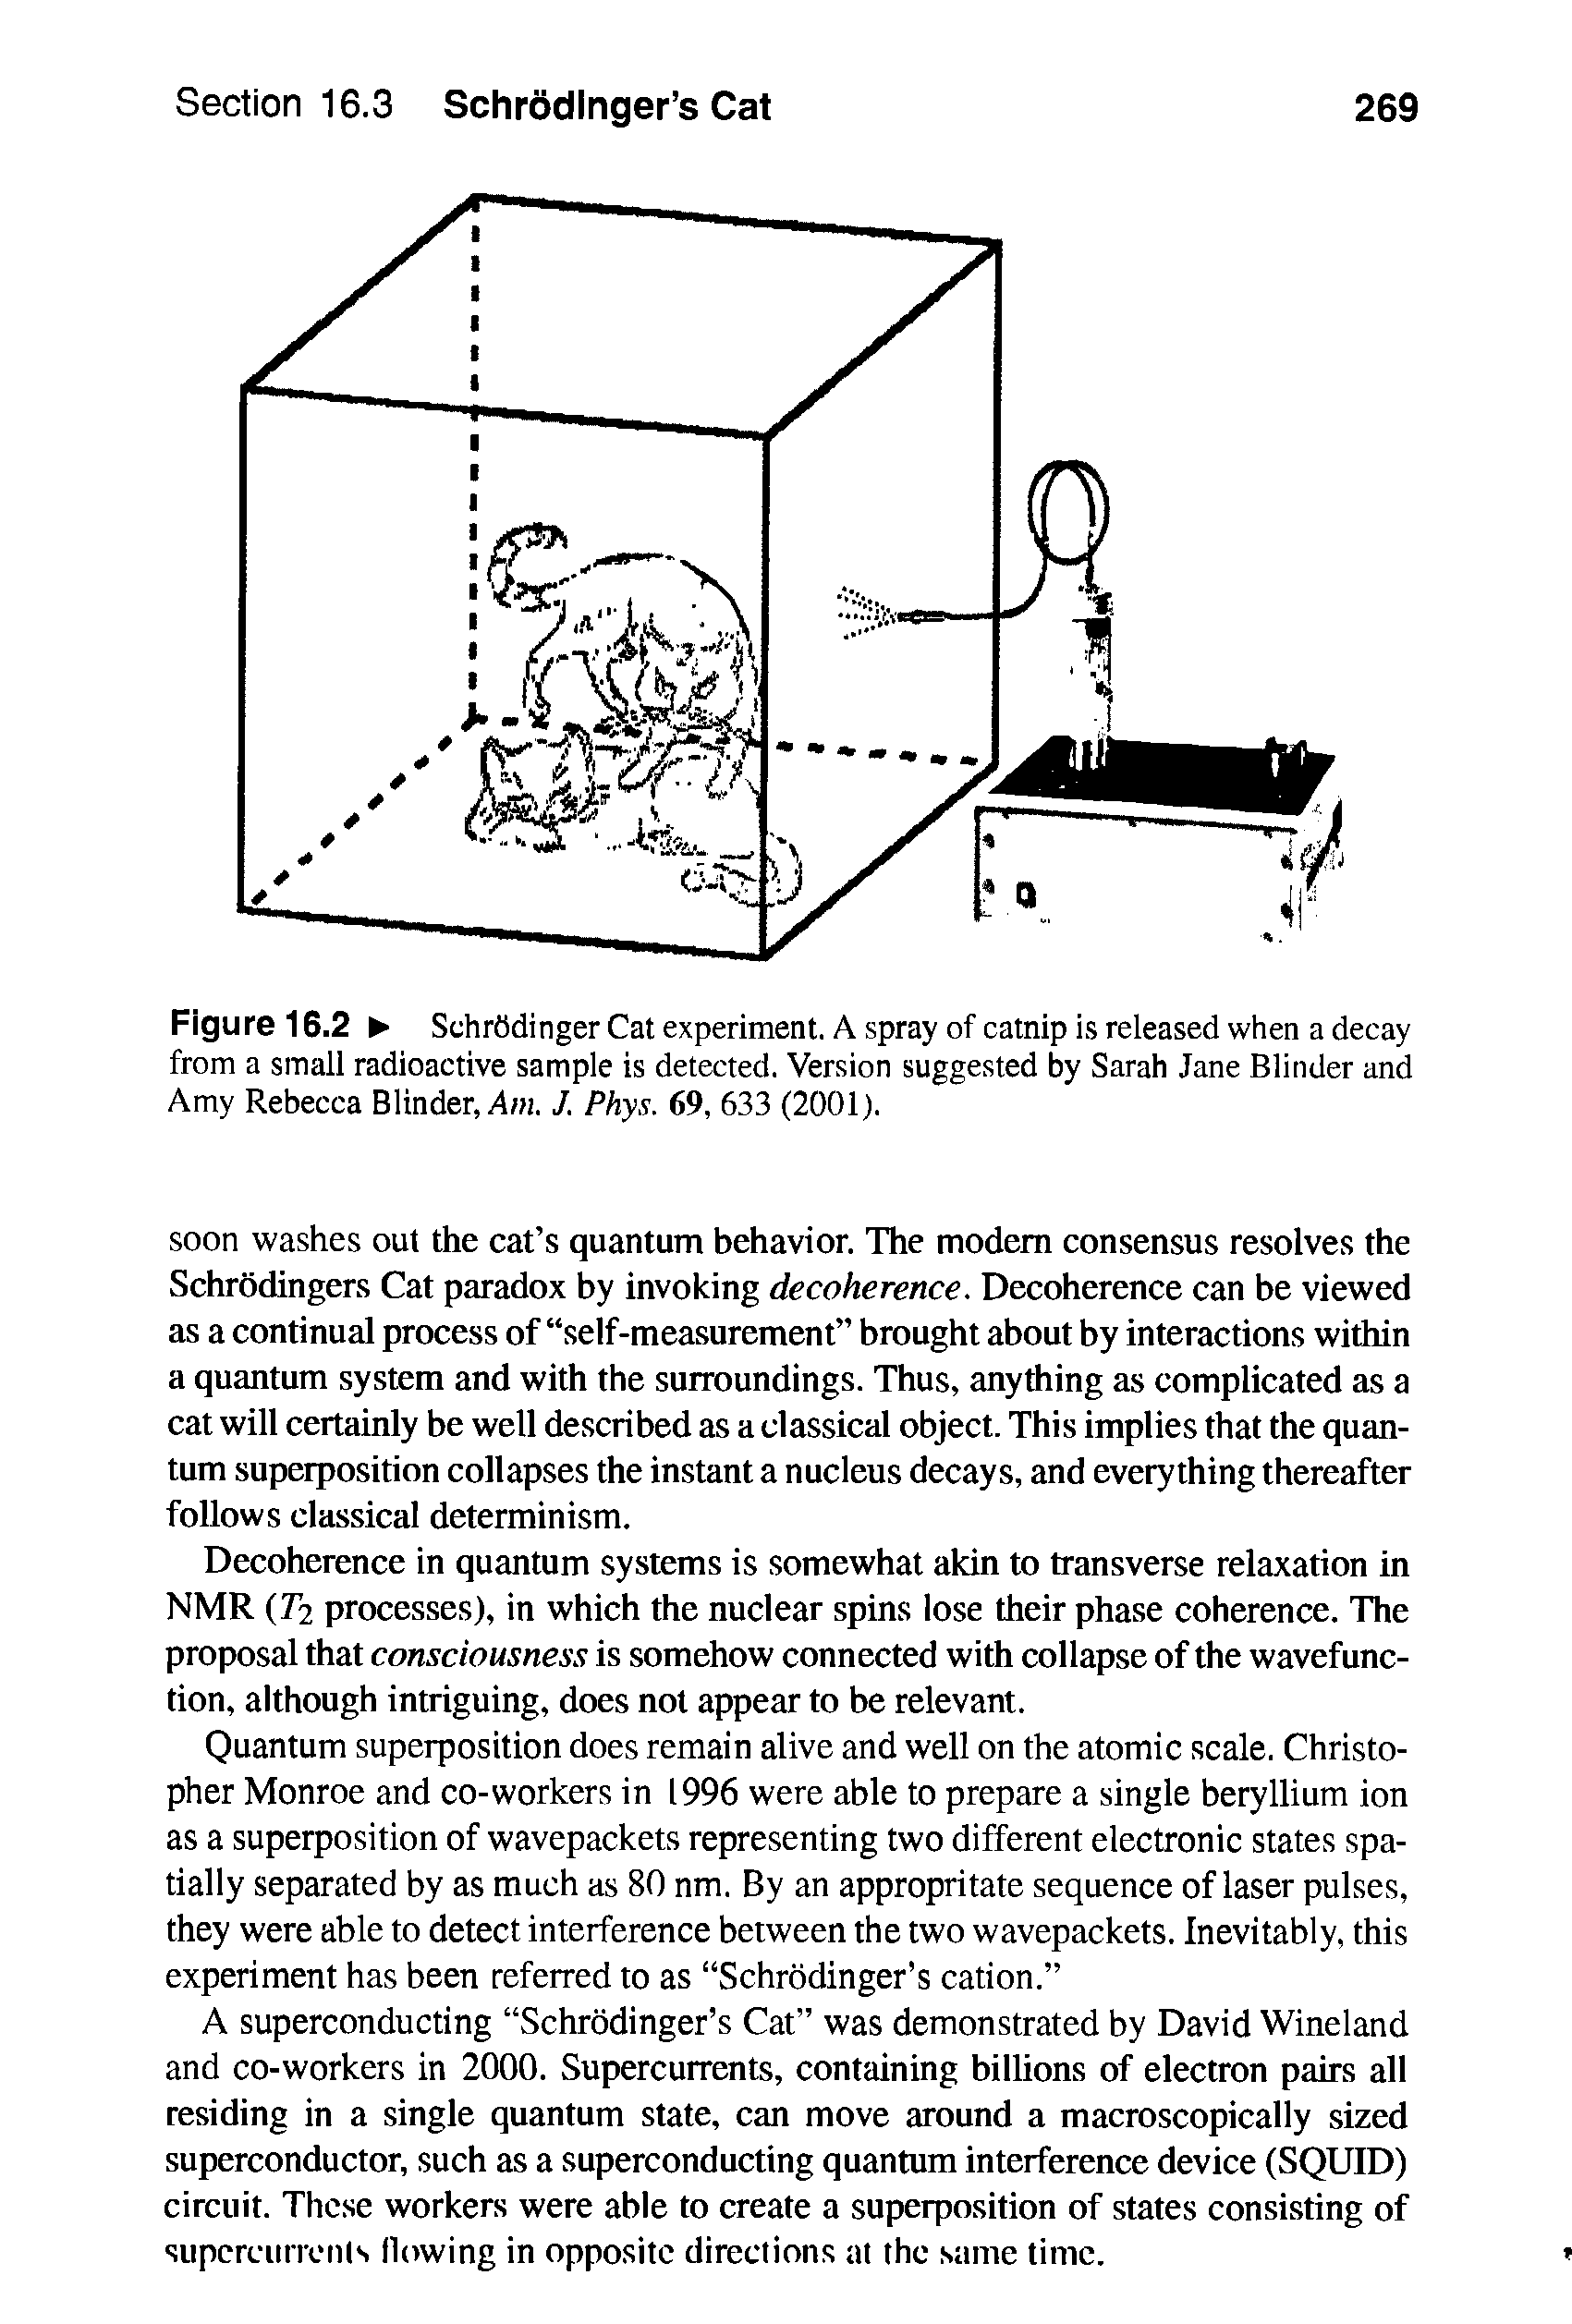 Figure 16.2 SchrOdinger Cat experiment. A spray of catnip is released when a decay from a small radioactive sample is detected. Version suggested by Sarah Jane Blinder and Amy Rebecca Blinder, A/ . J. Phys. 69, 633 (2001).